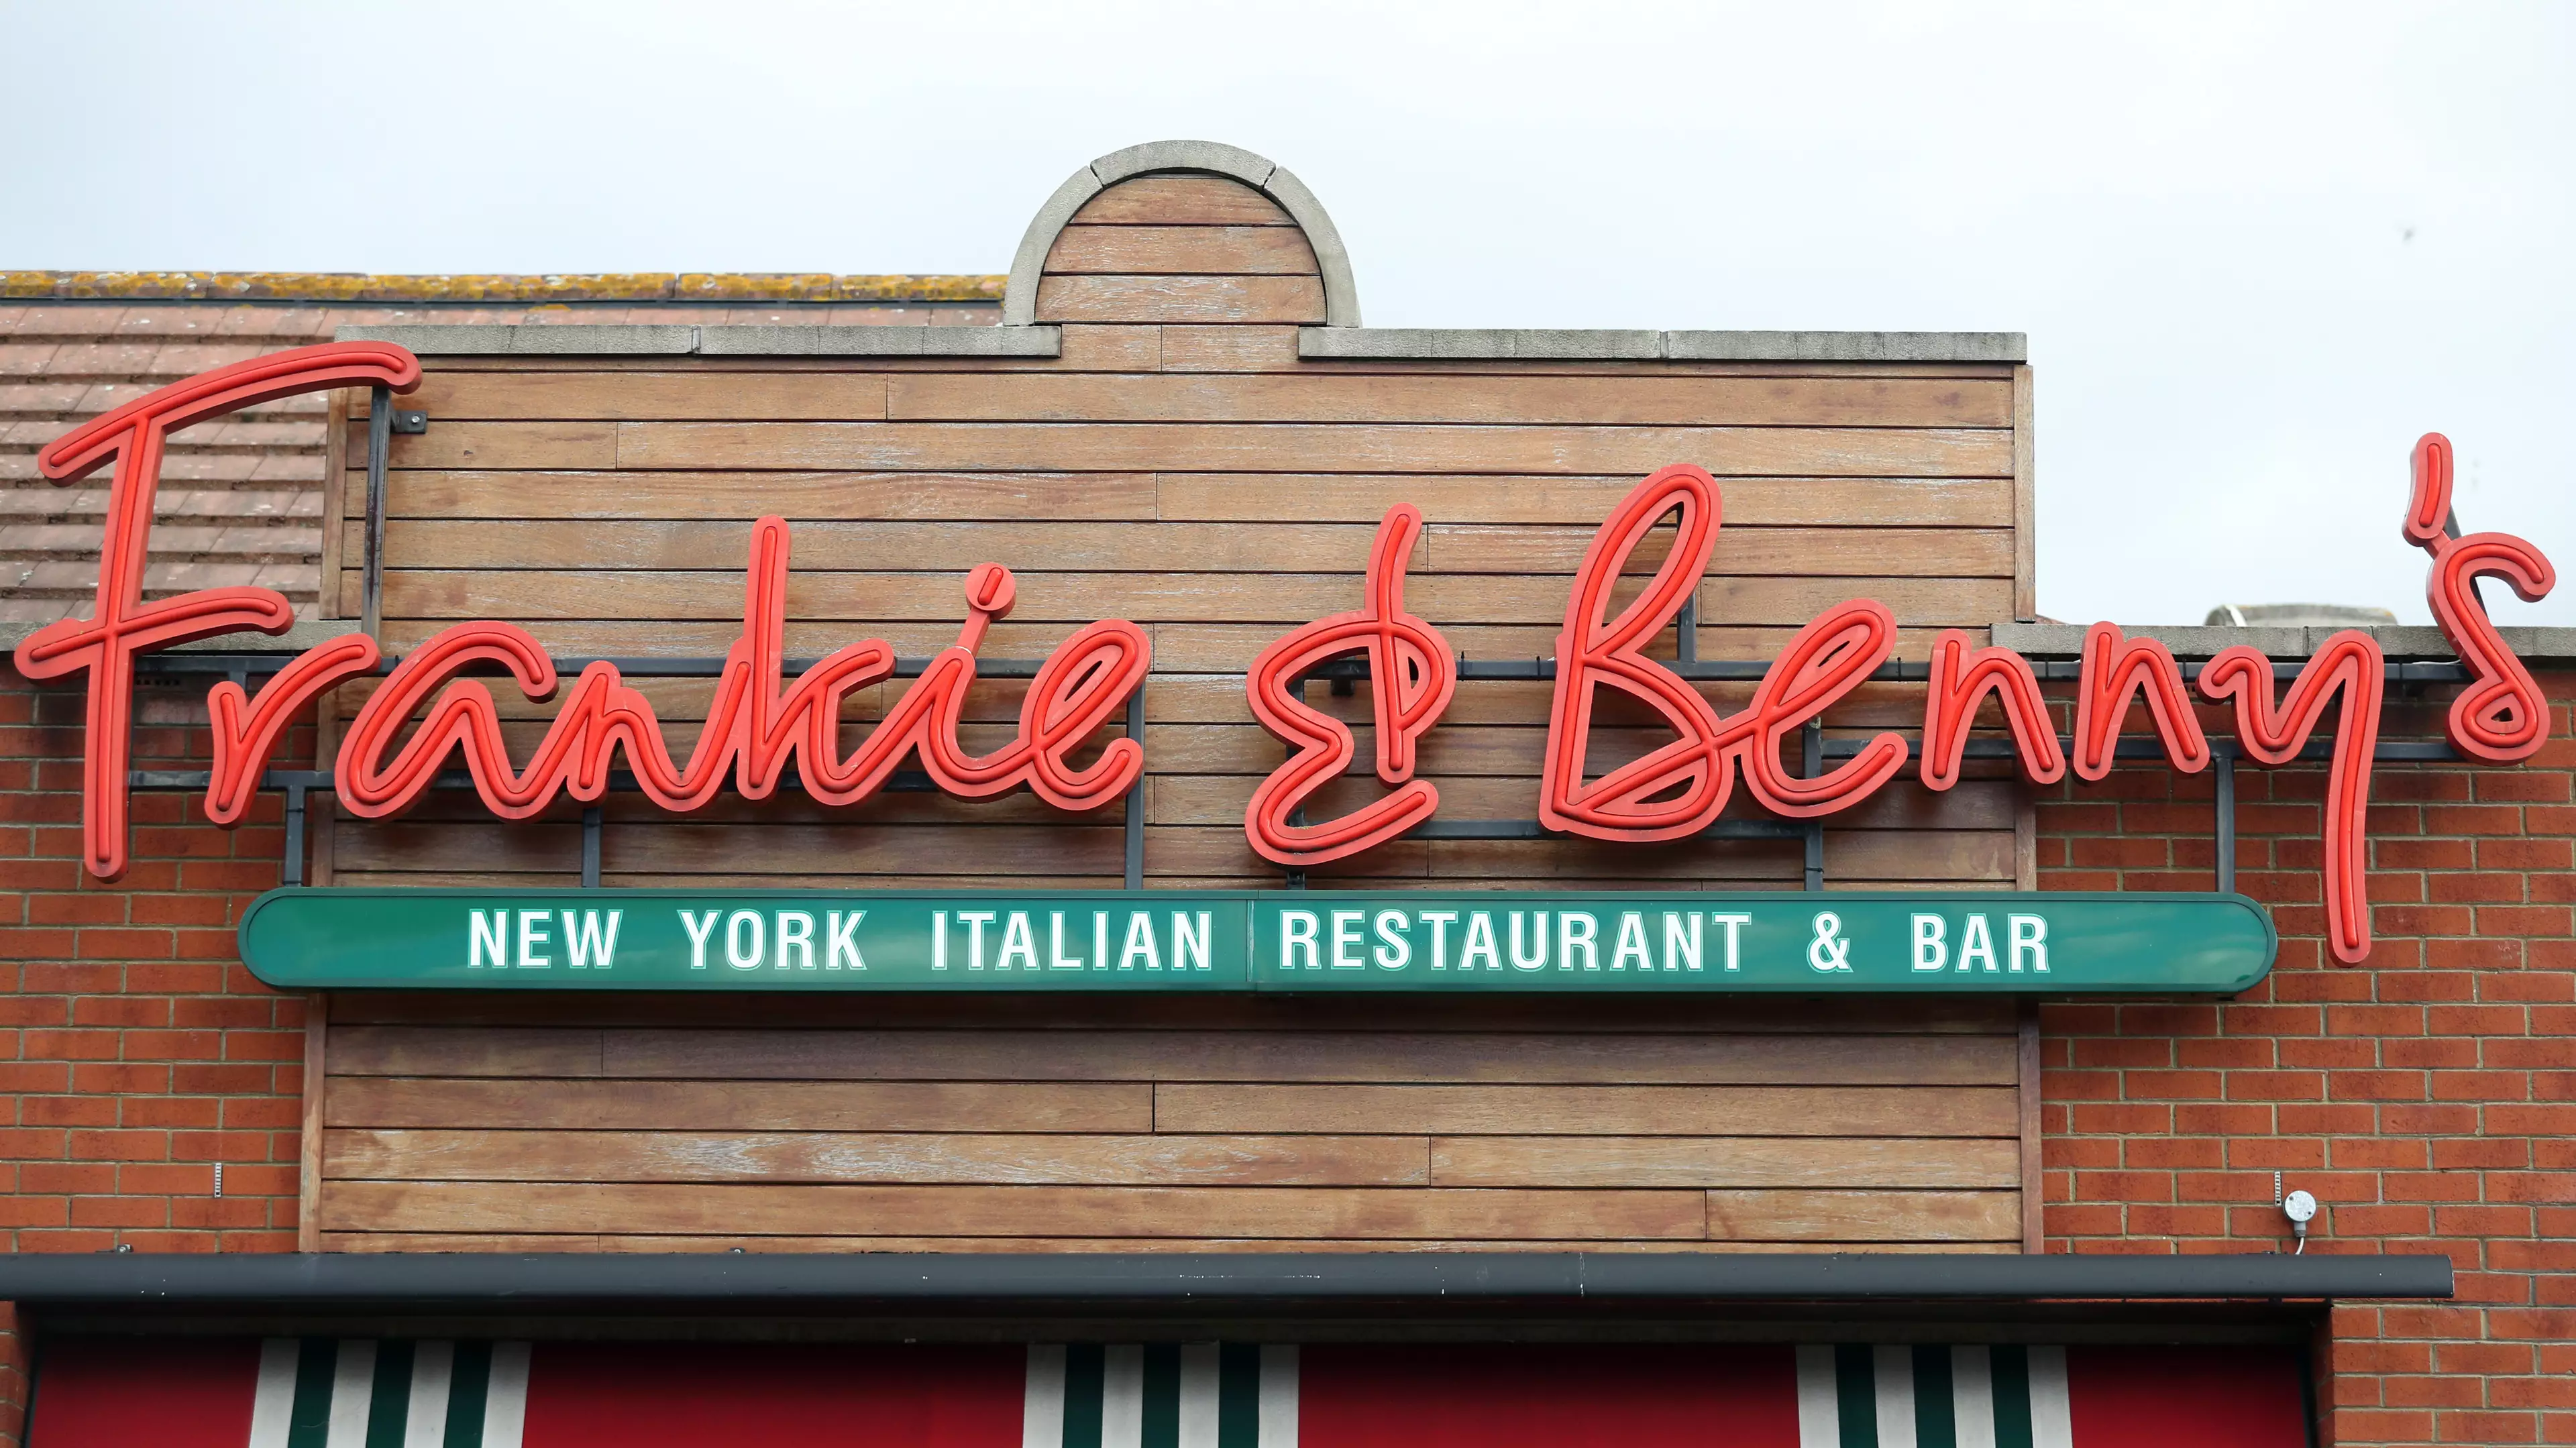 Frankie & Benny's To Shut 'Large Number' Of Stores Permanently